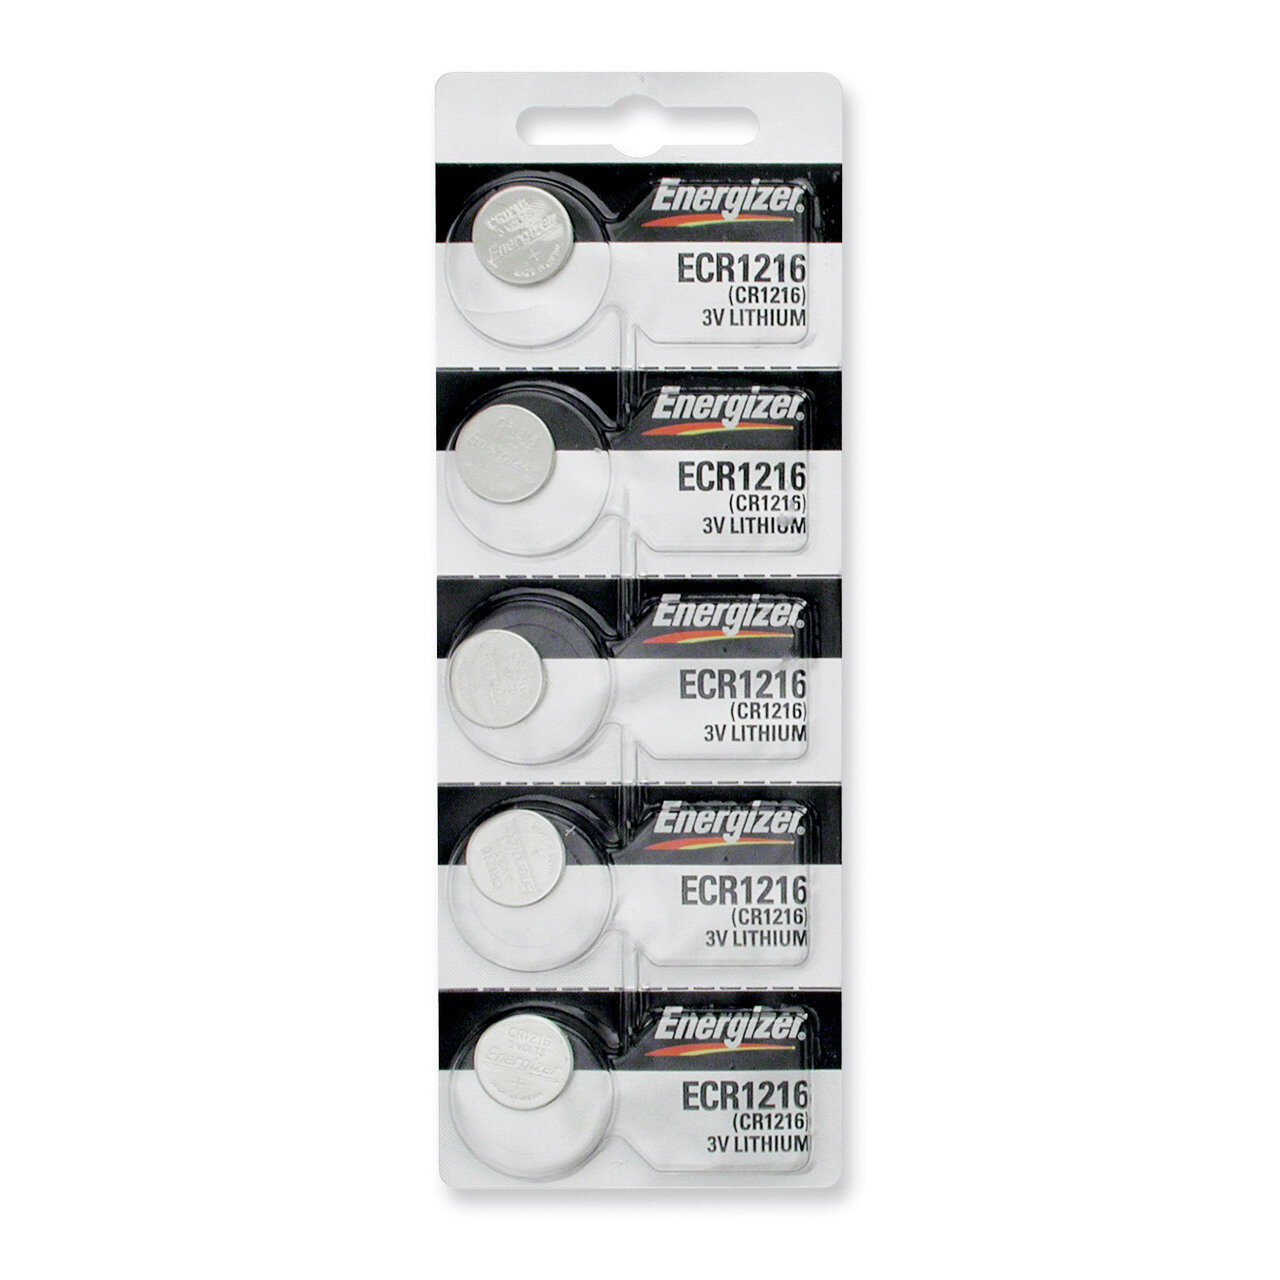 Energizer Lithium Batteries Package of 5 WB1216